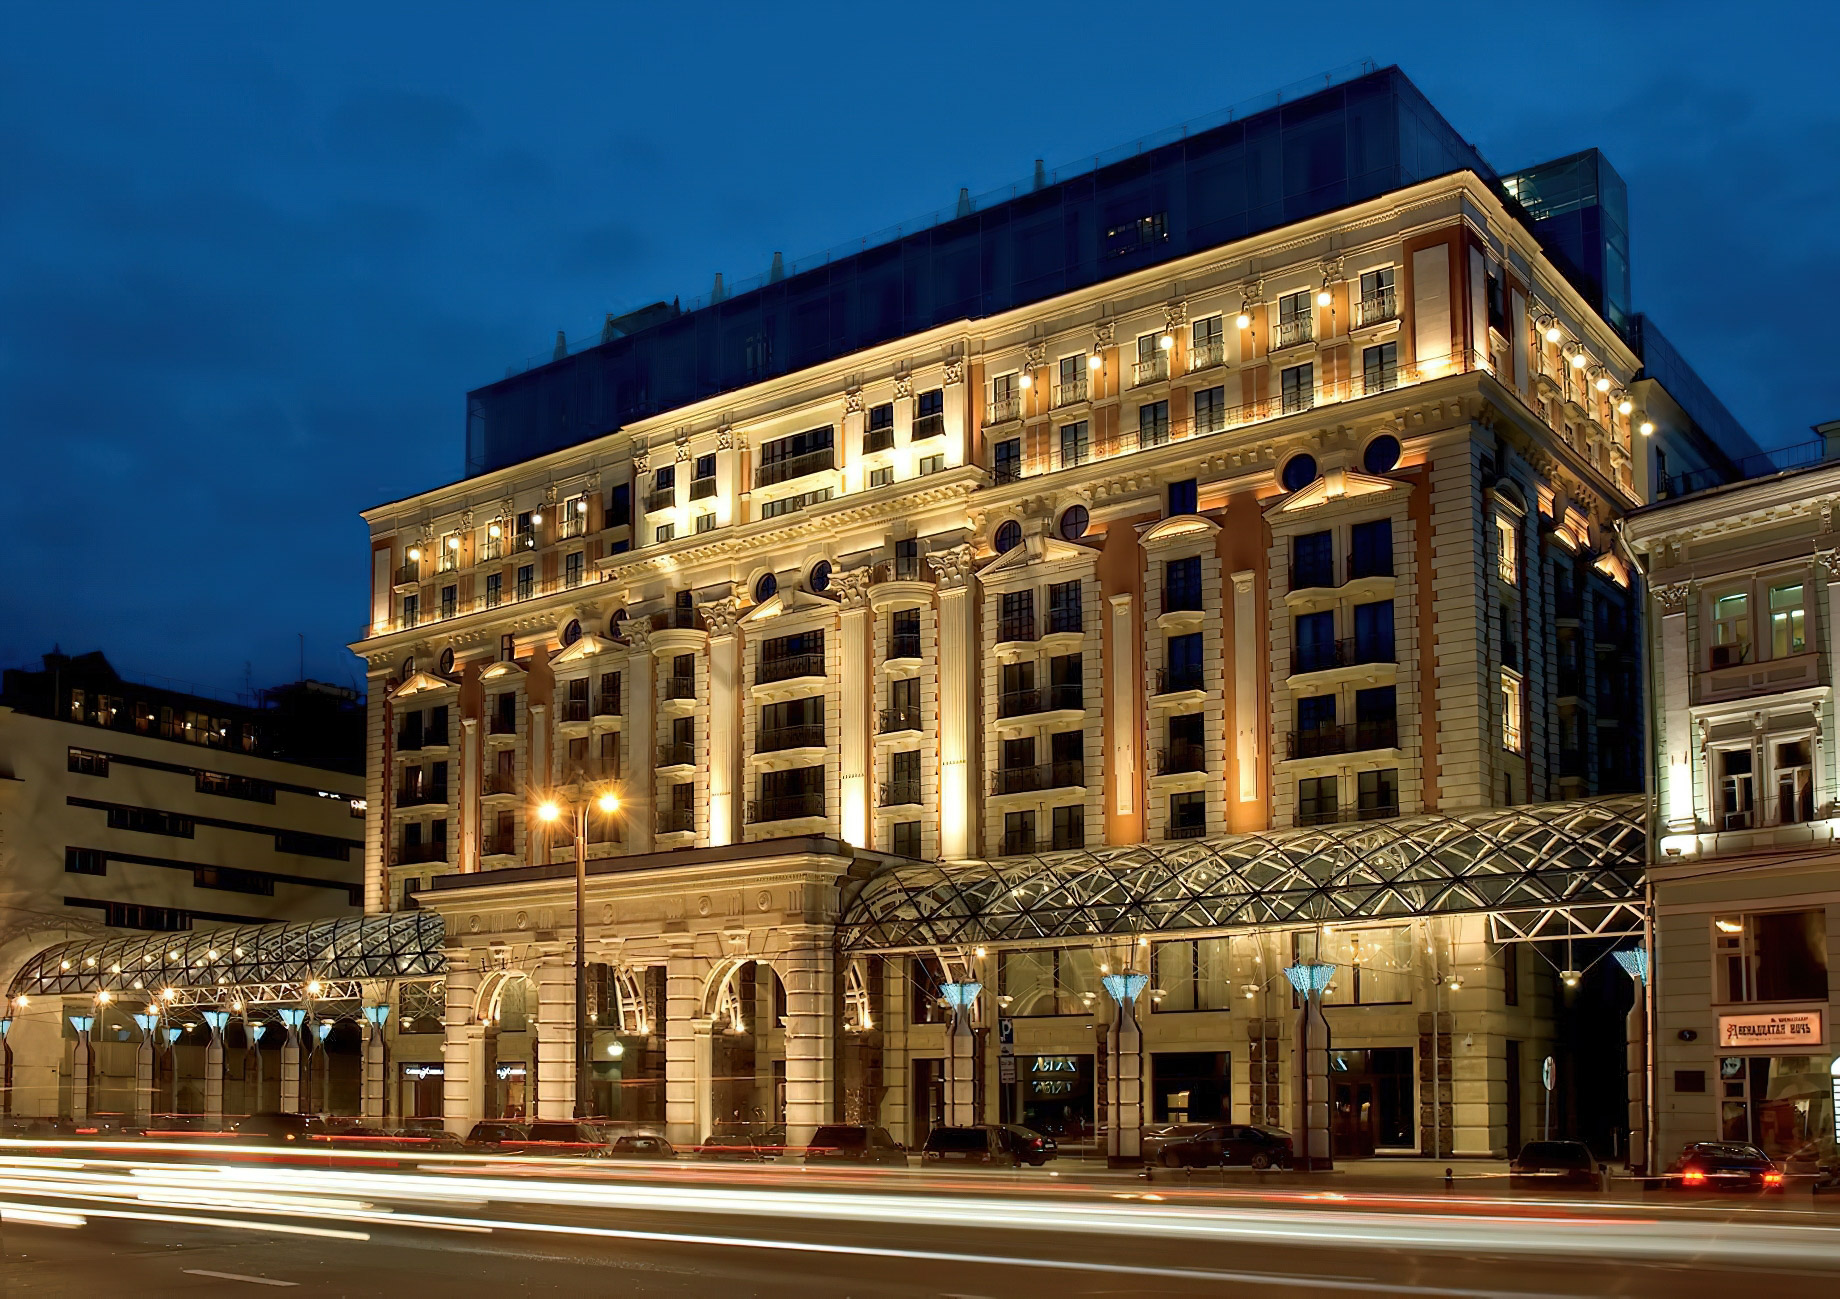 The Ritz-Carlton, Moscow Hotel – Moscow, Russia – Hotel Exterior Night